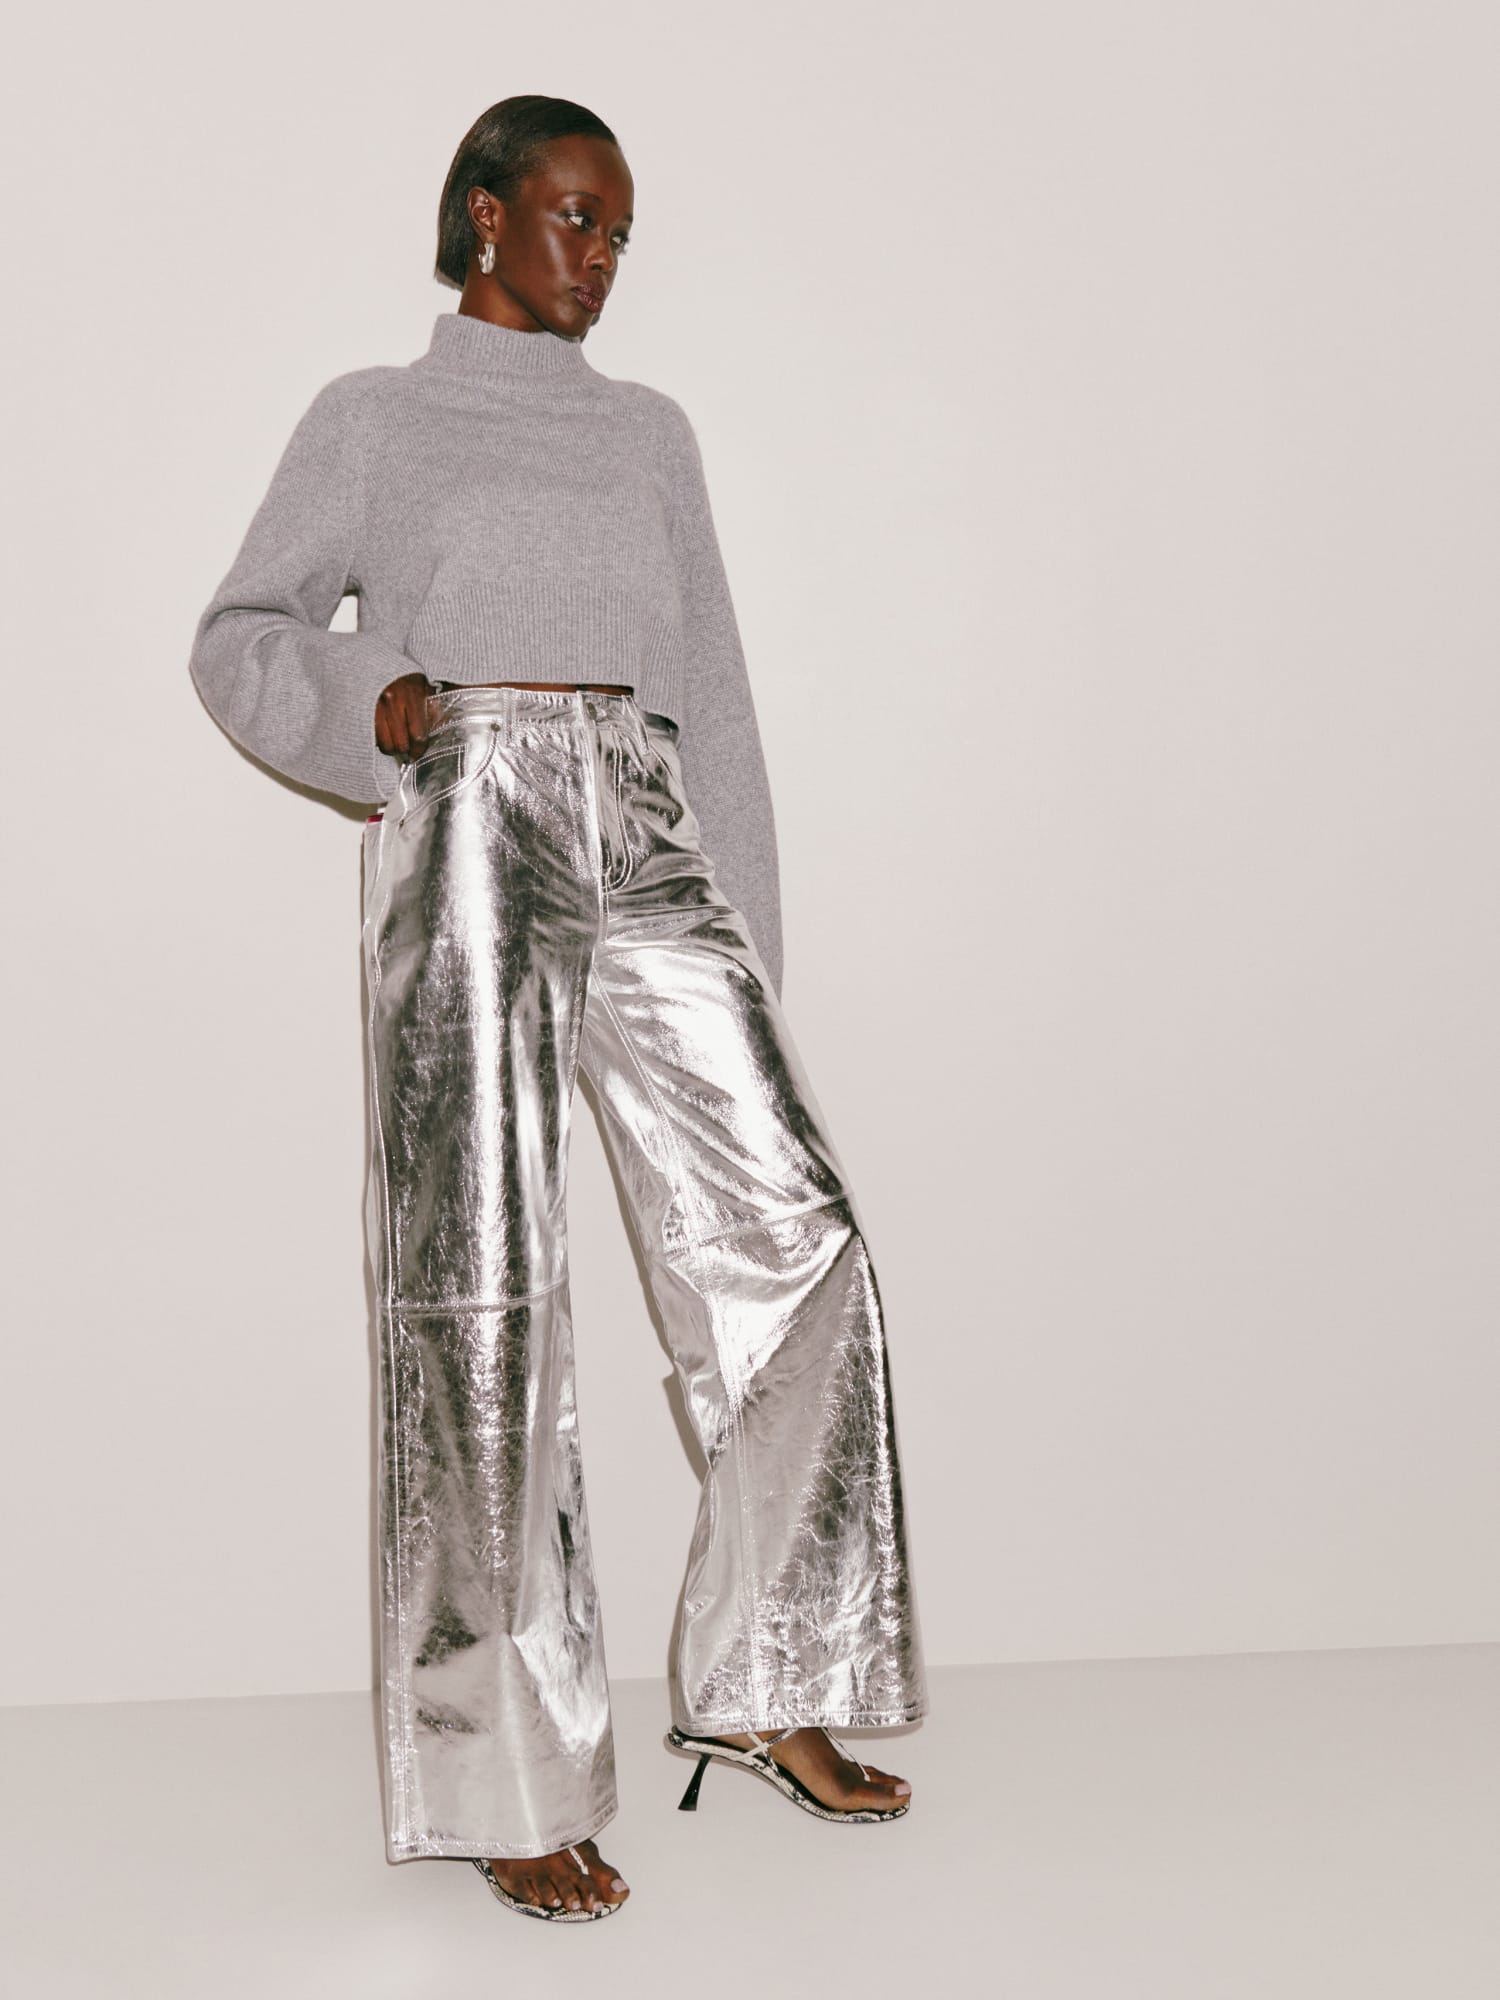 Leather Low Rise Pants - Leather Pants